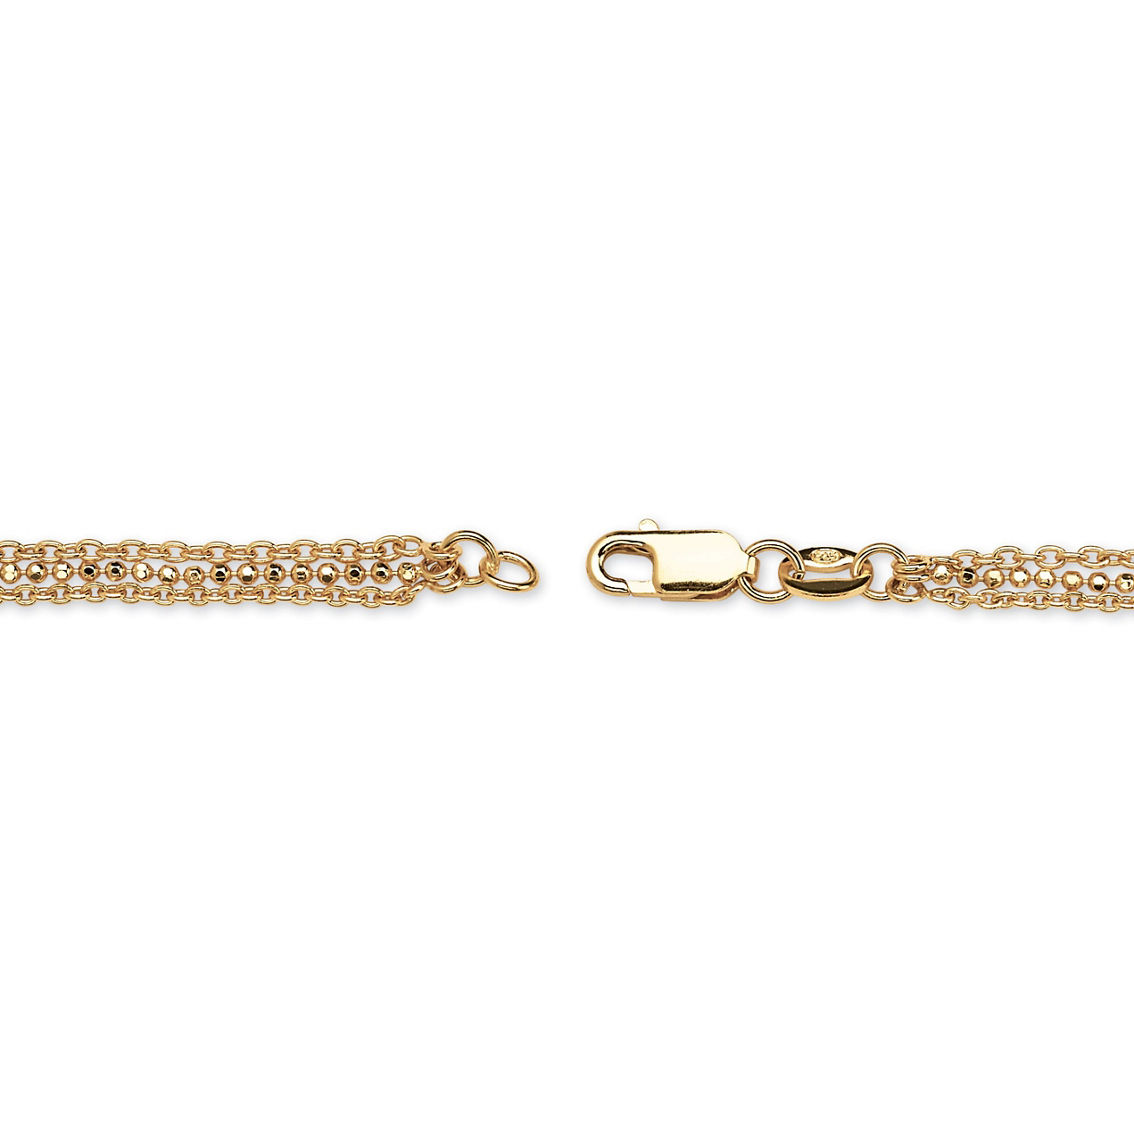 Triple-Strand Beaded Ankle Bracelet in 18k Gold-plated Sterling Silver - Image 2 of 4